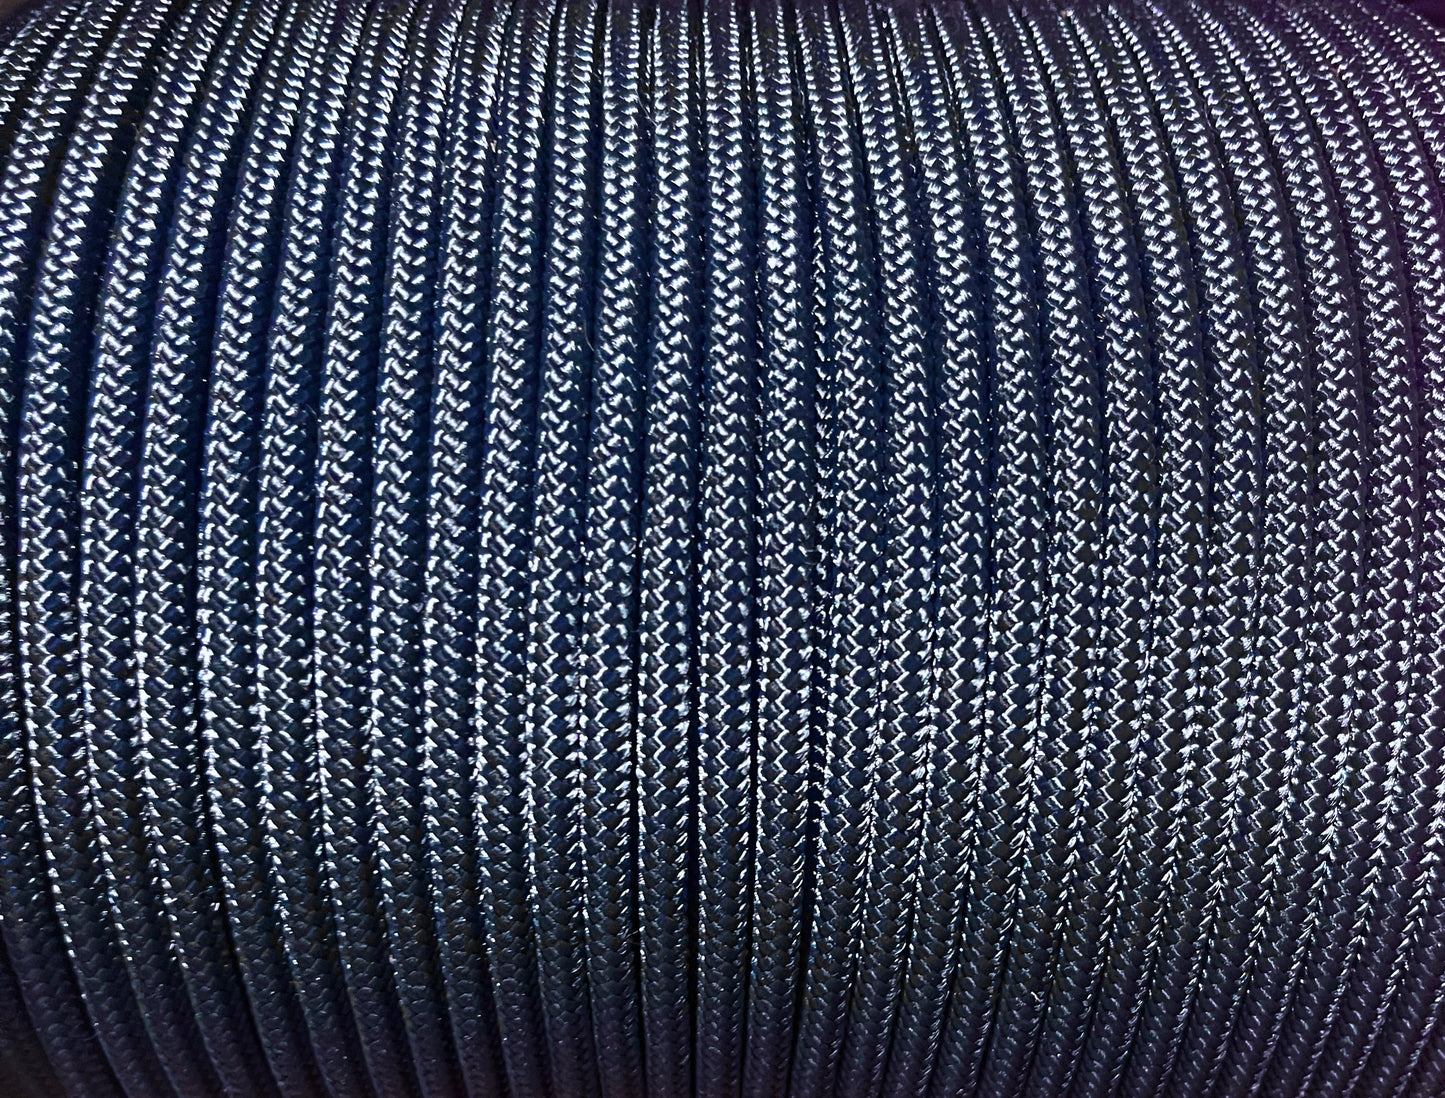 Stiff Polyester Halter Cord 1/4" by the foot